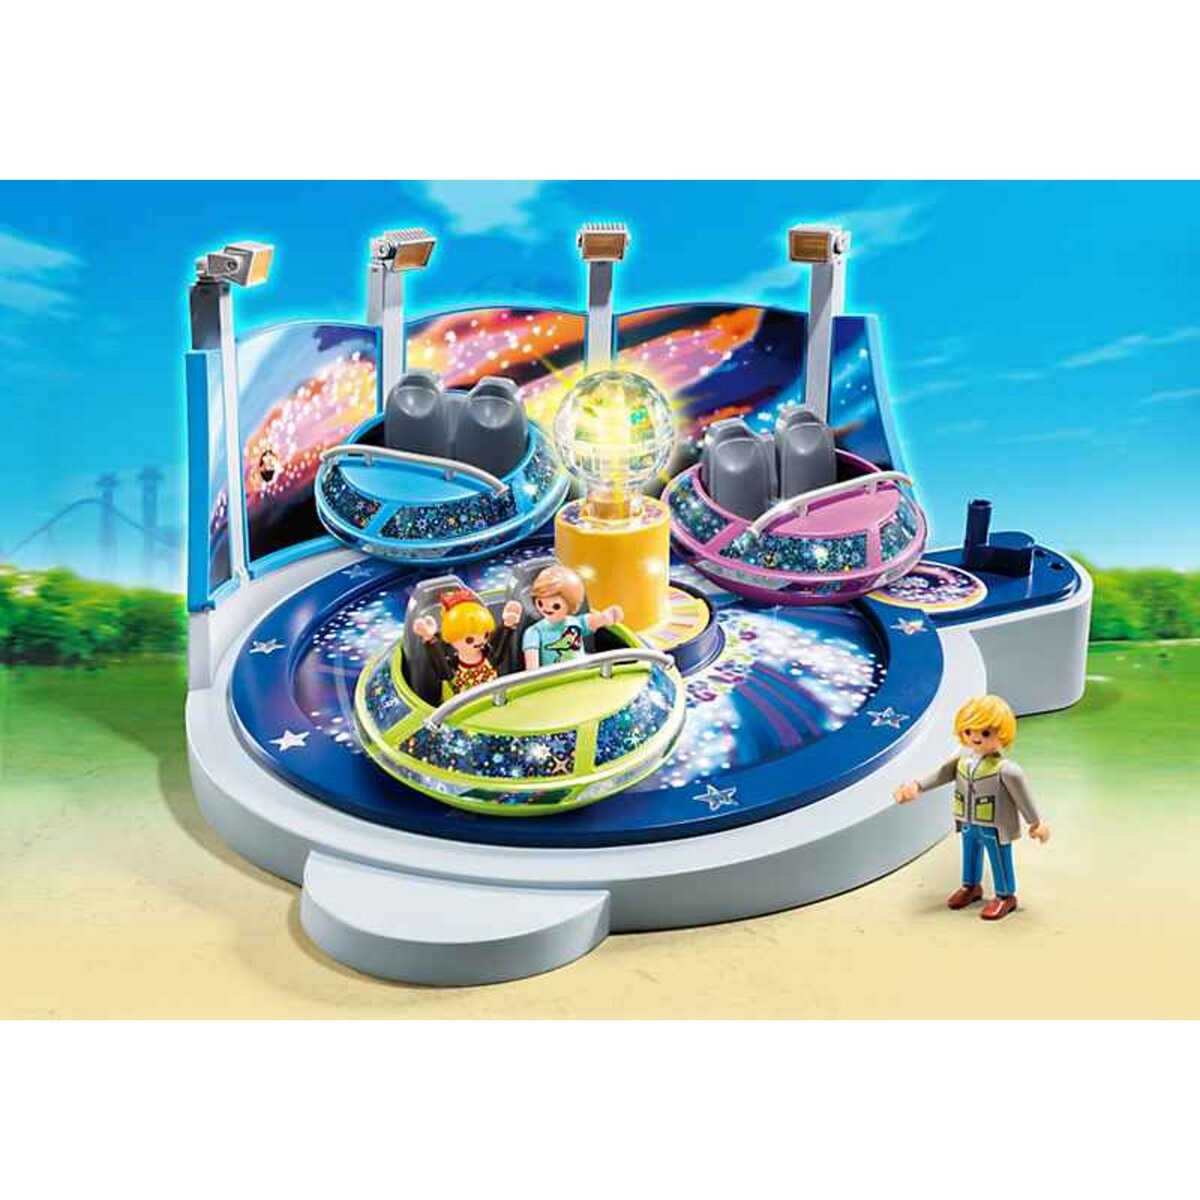 PLAYMOBIL 5554 Attraction avec effets lumineux